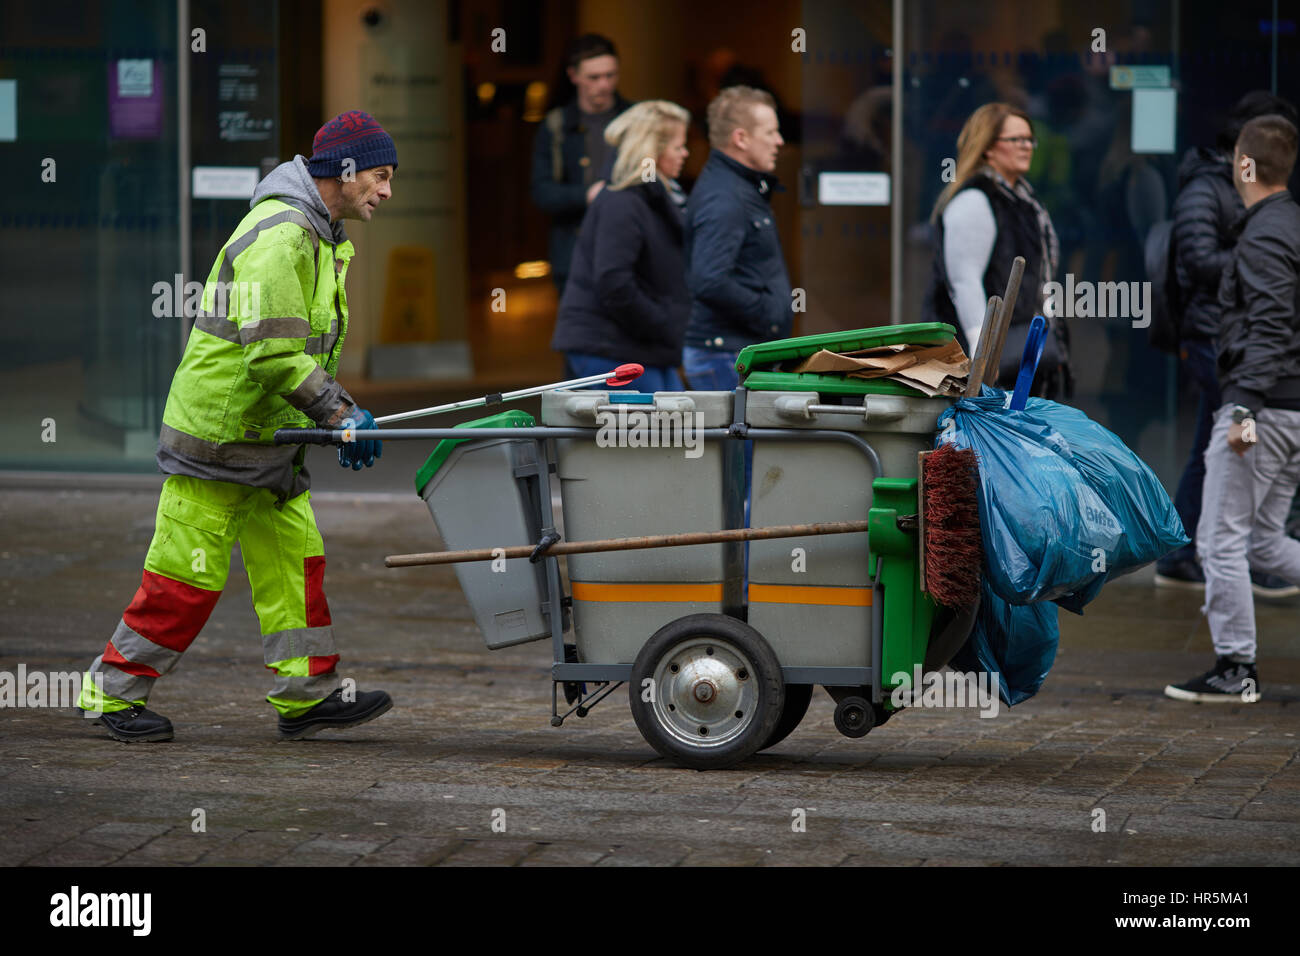 Council bin emptying with hand cart pushed down Manchester, Market Street, England,UK. Stock Photo